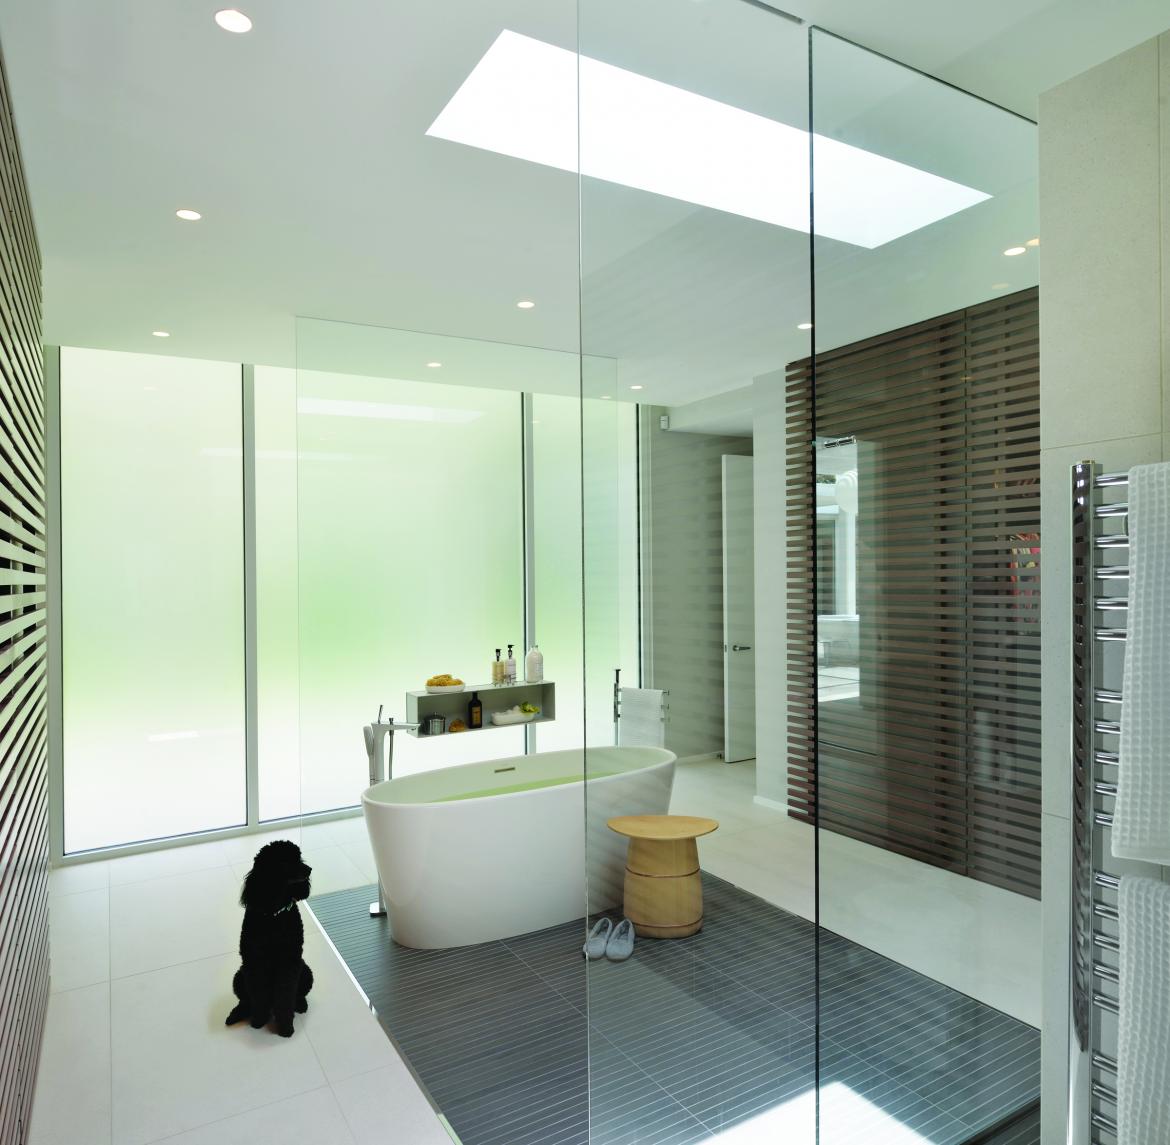 When a young couple with children and dogs bought a 1963 Mid Century-style residence in Houston that needed spatial reorganization, they asked Murphy Mears Architects and Kuhl Linscomb Design (KLD) to reconfigure the master bath